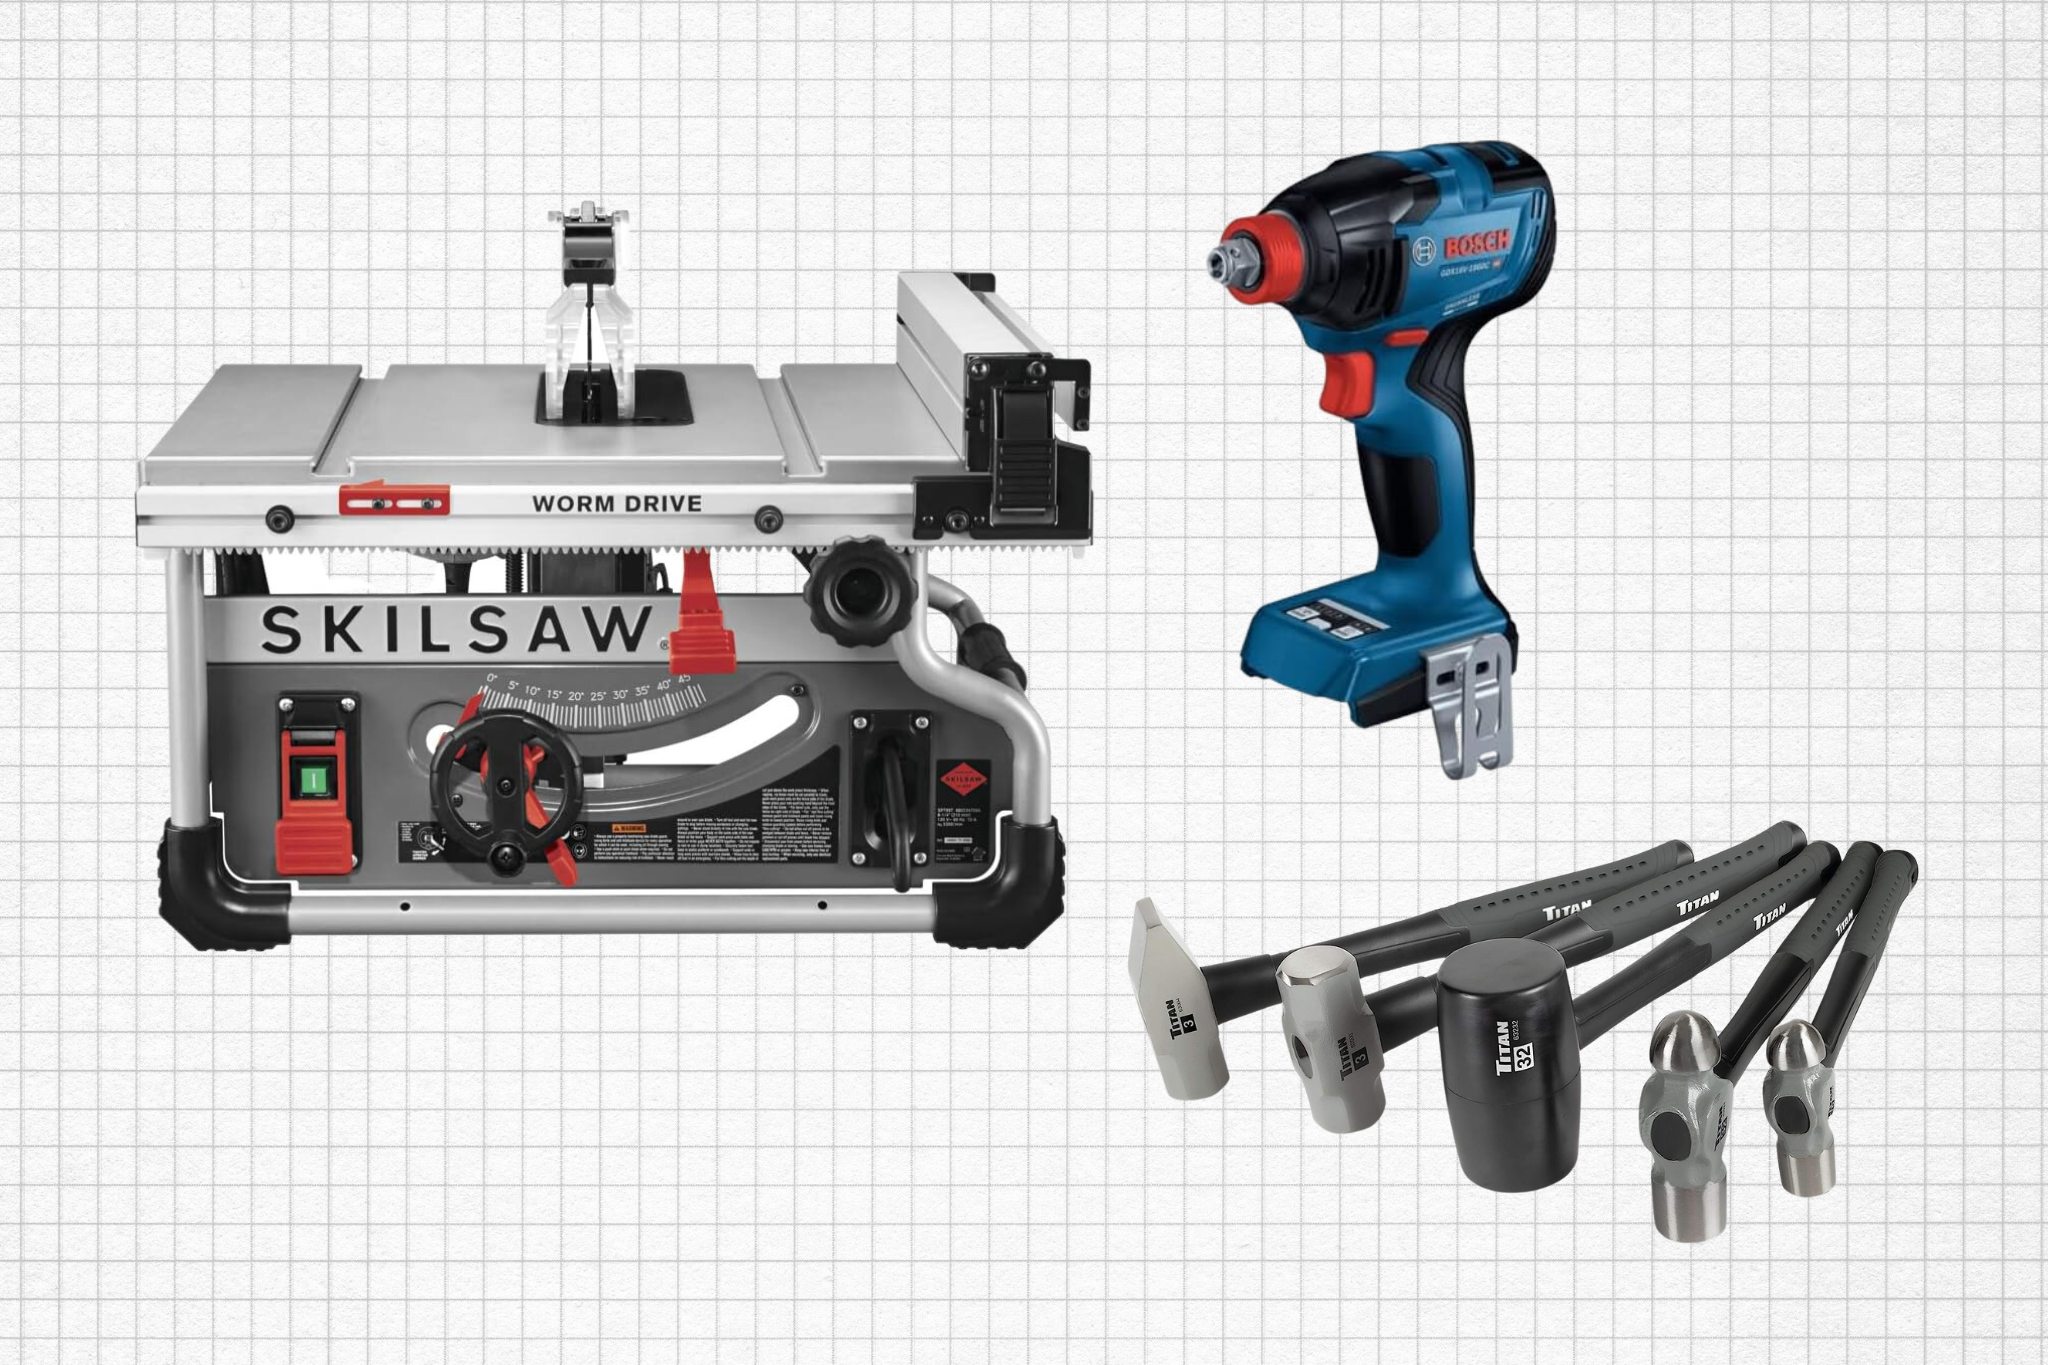 Black & Decker Prime Day discounts are step one for your winter